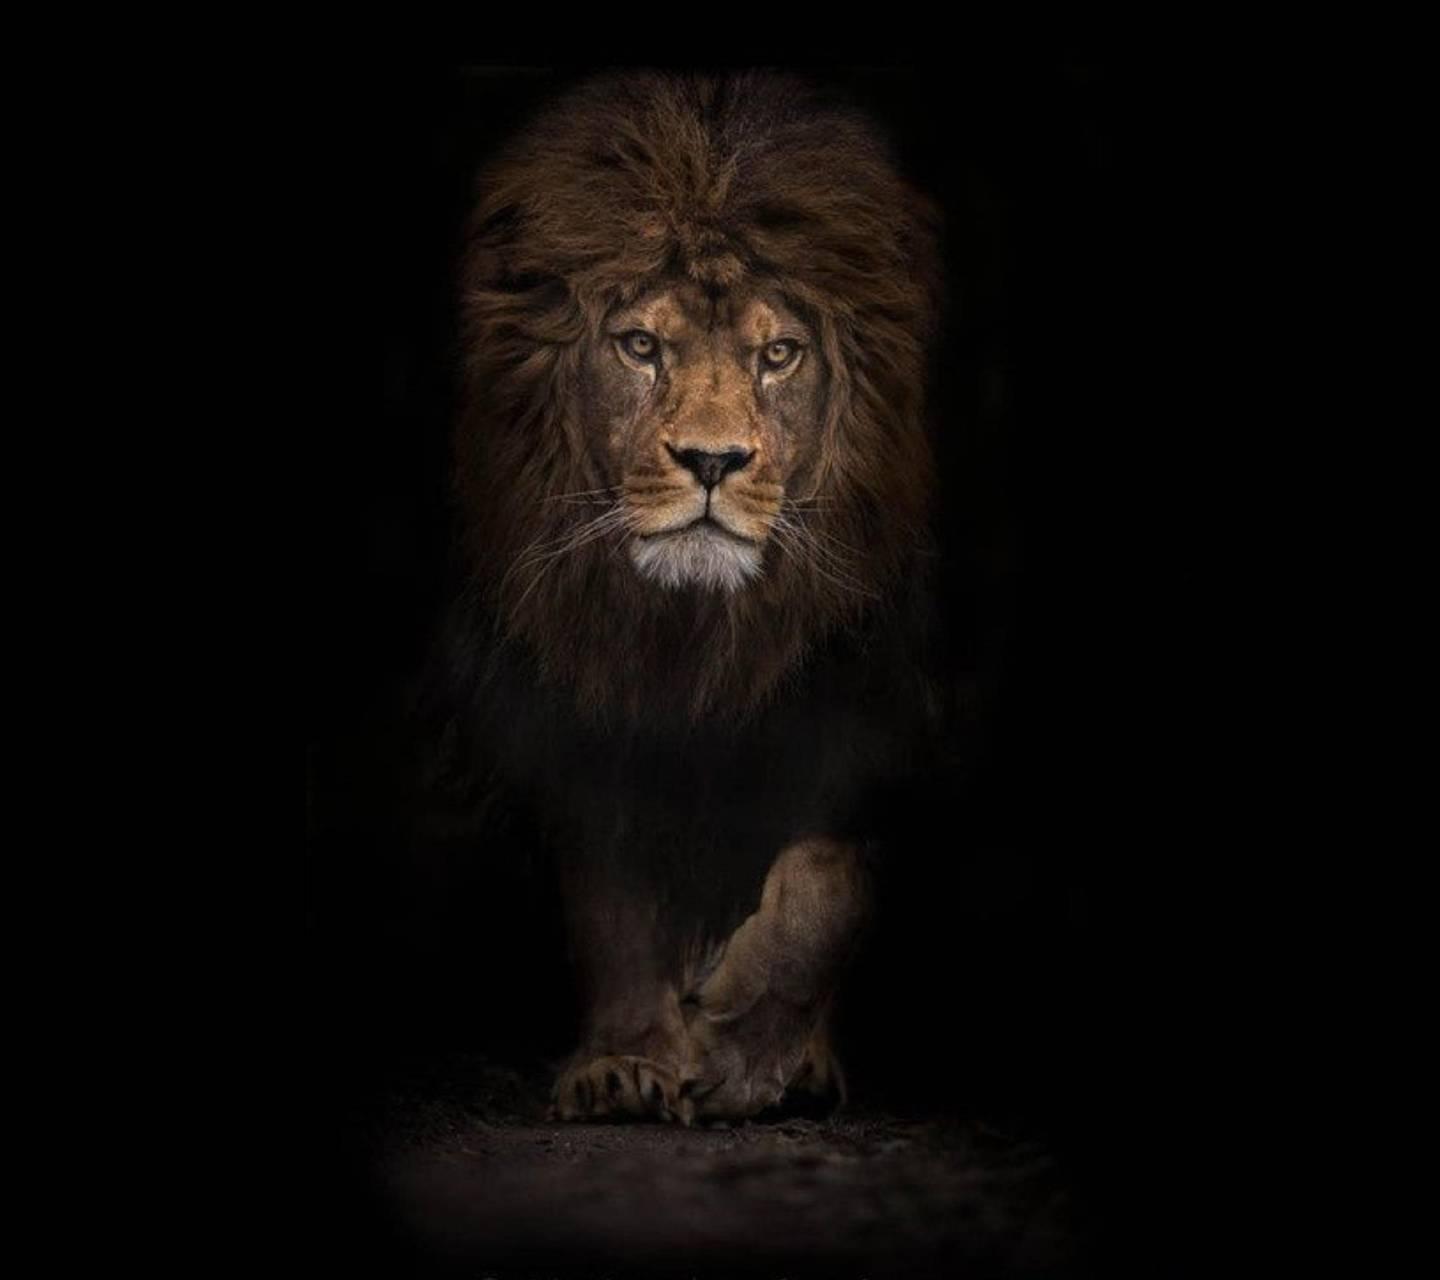 The King Lions Wallpaper HD